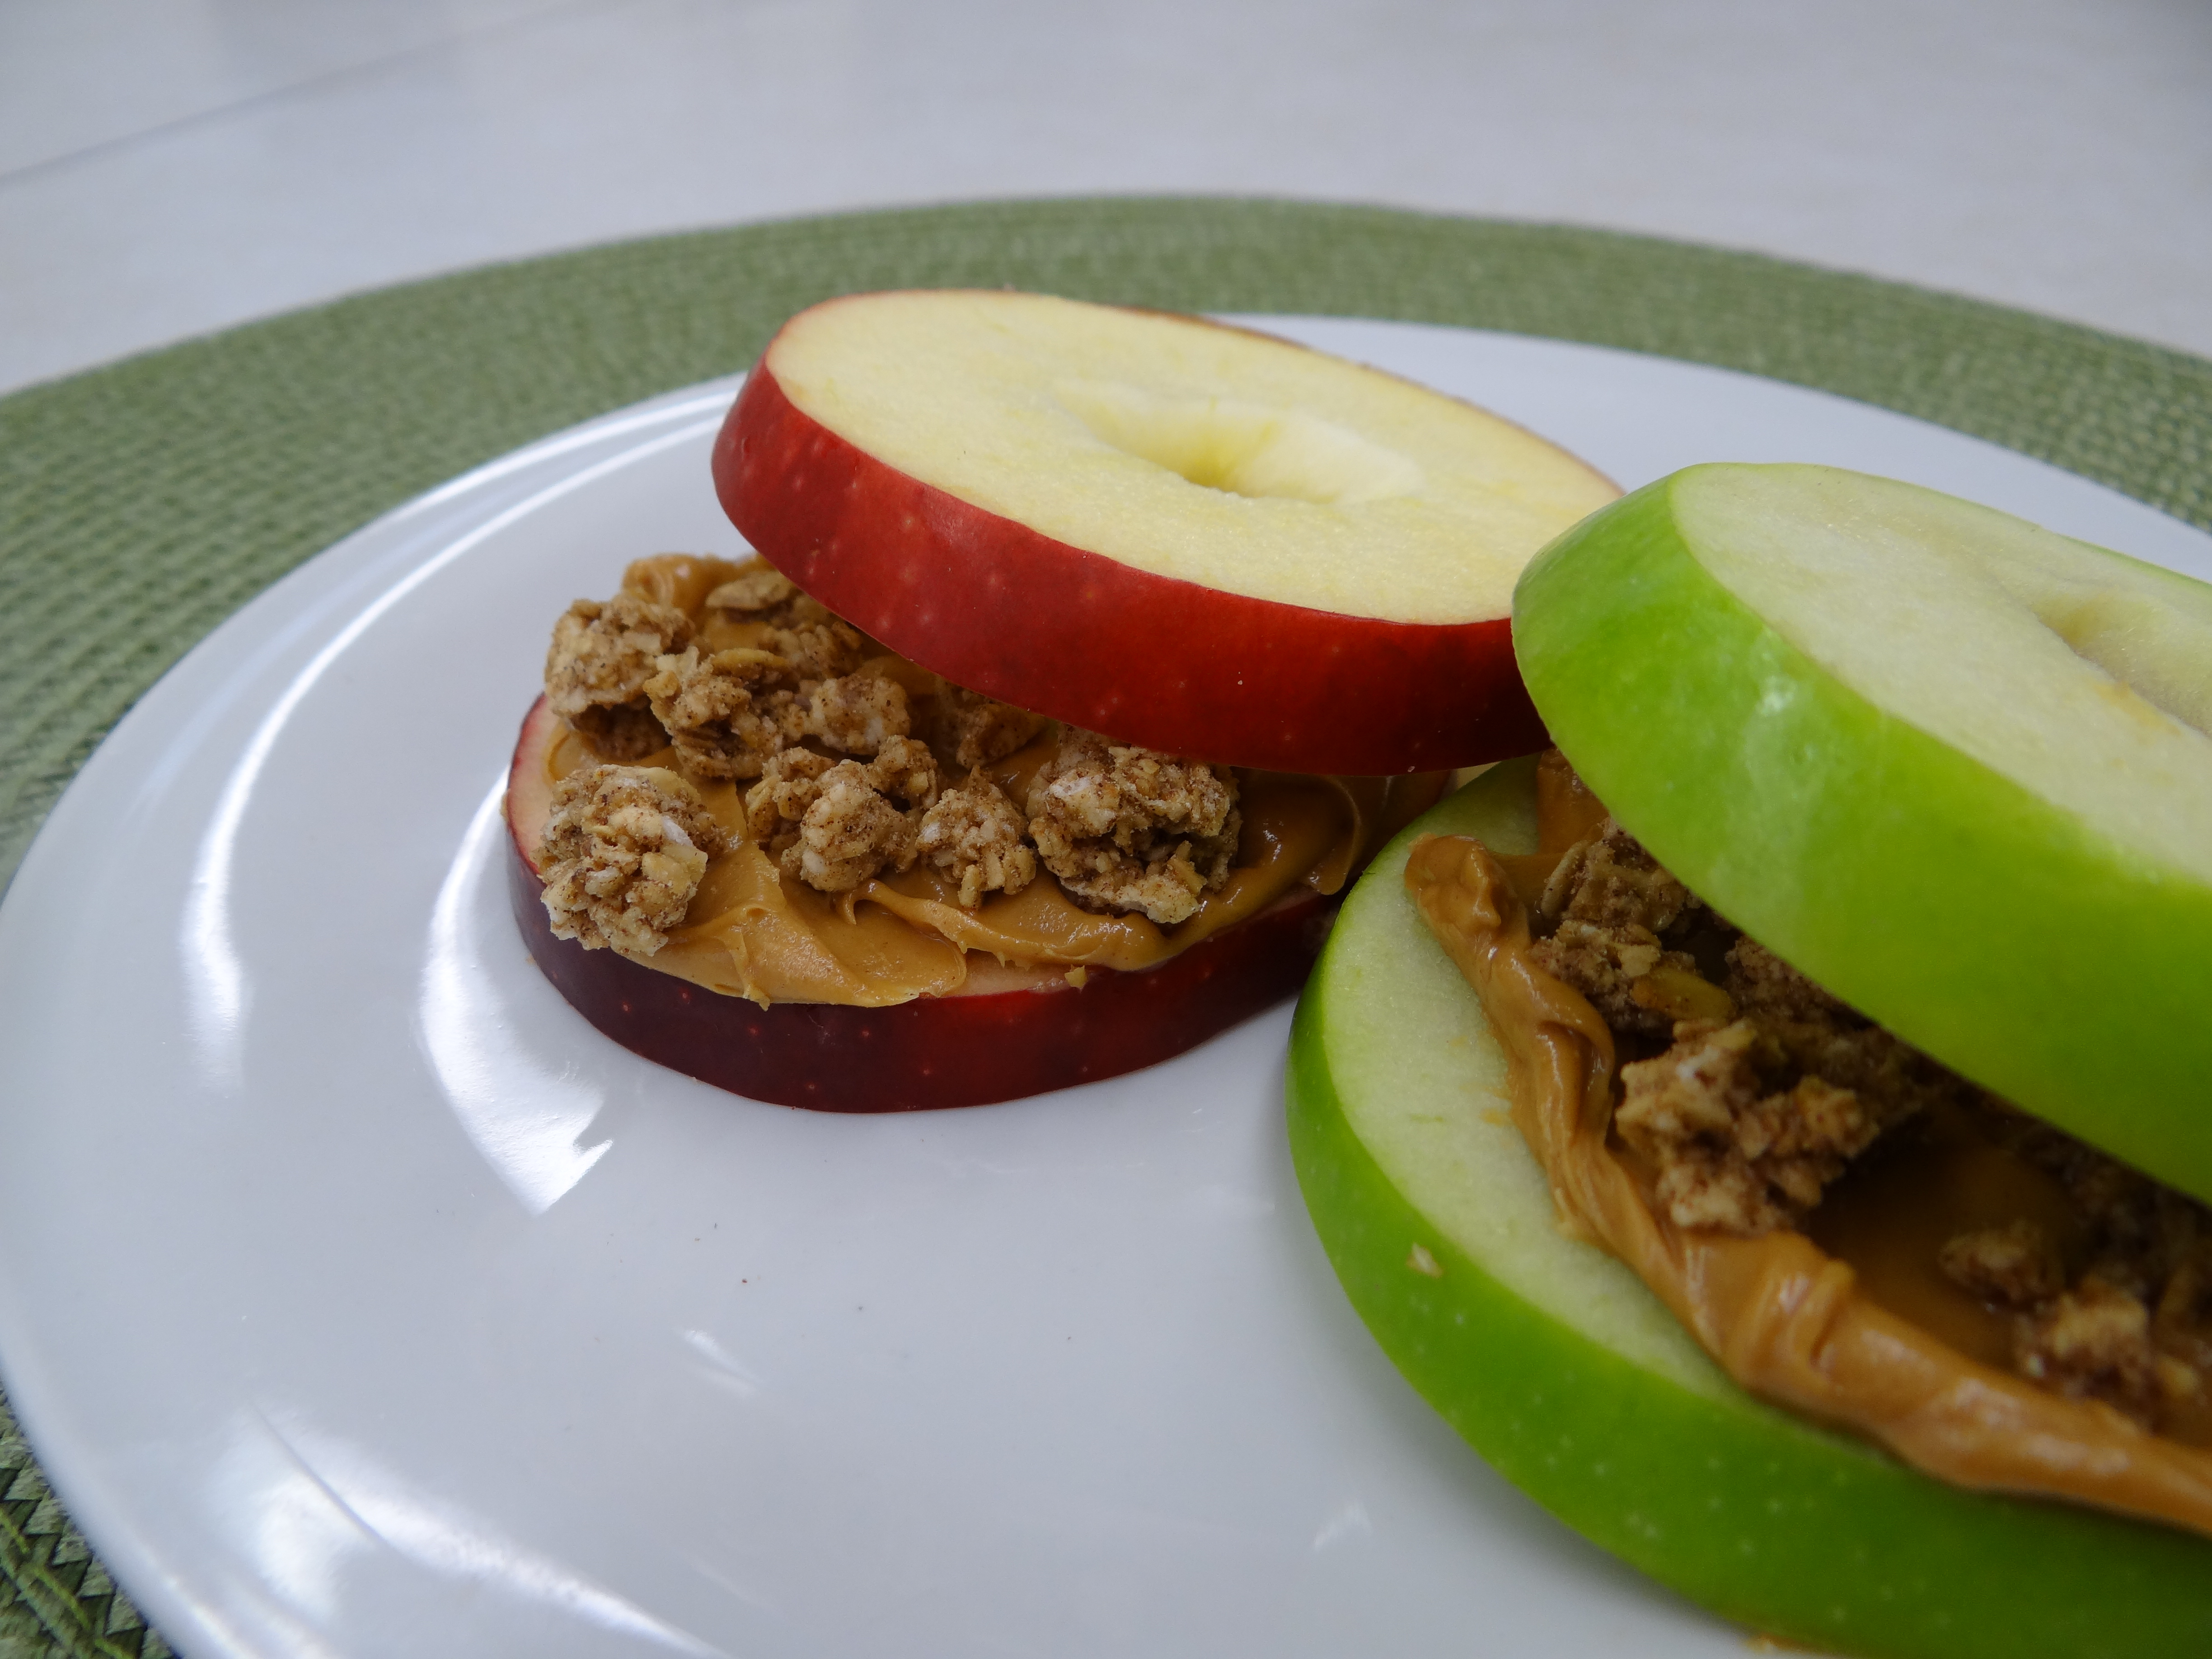 Fiber-rich fruit with nut butter is an easy-to-make, nutritious snack. (NDSU photo)